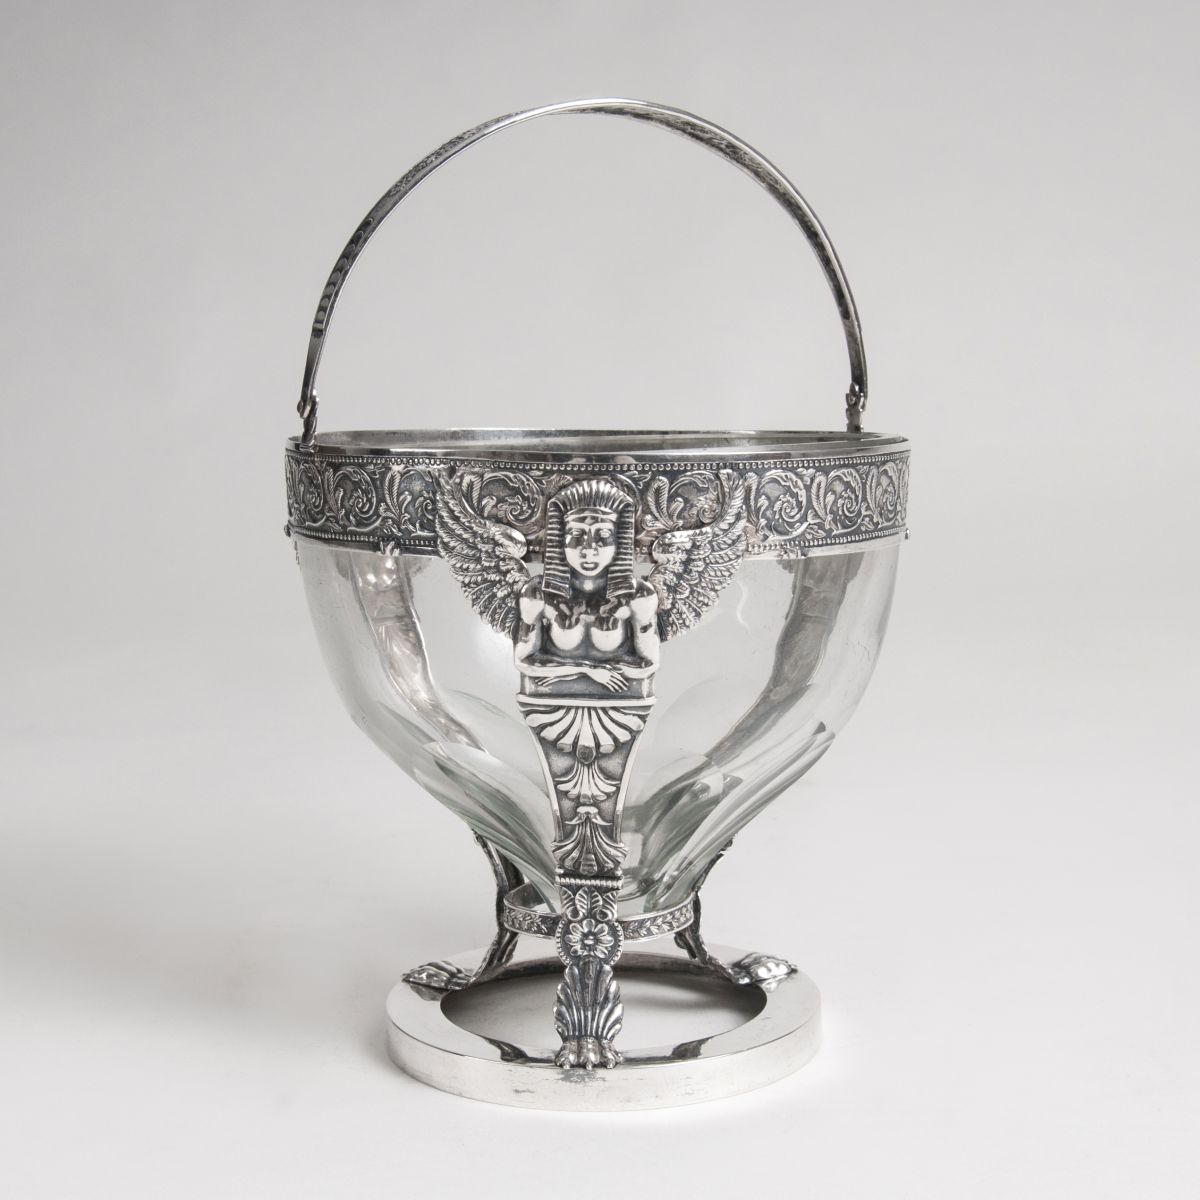 An Empire basket with fine ornaments and glass insert